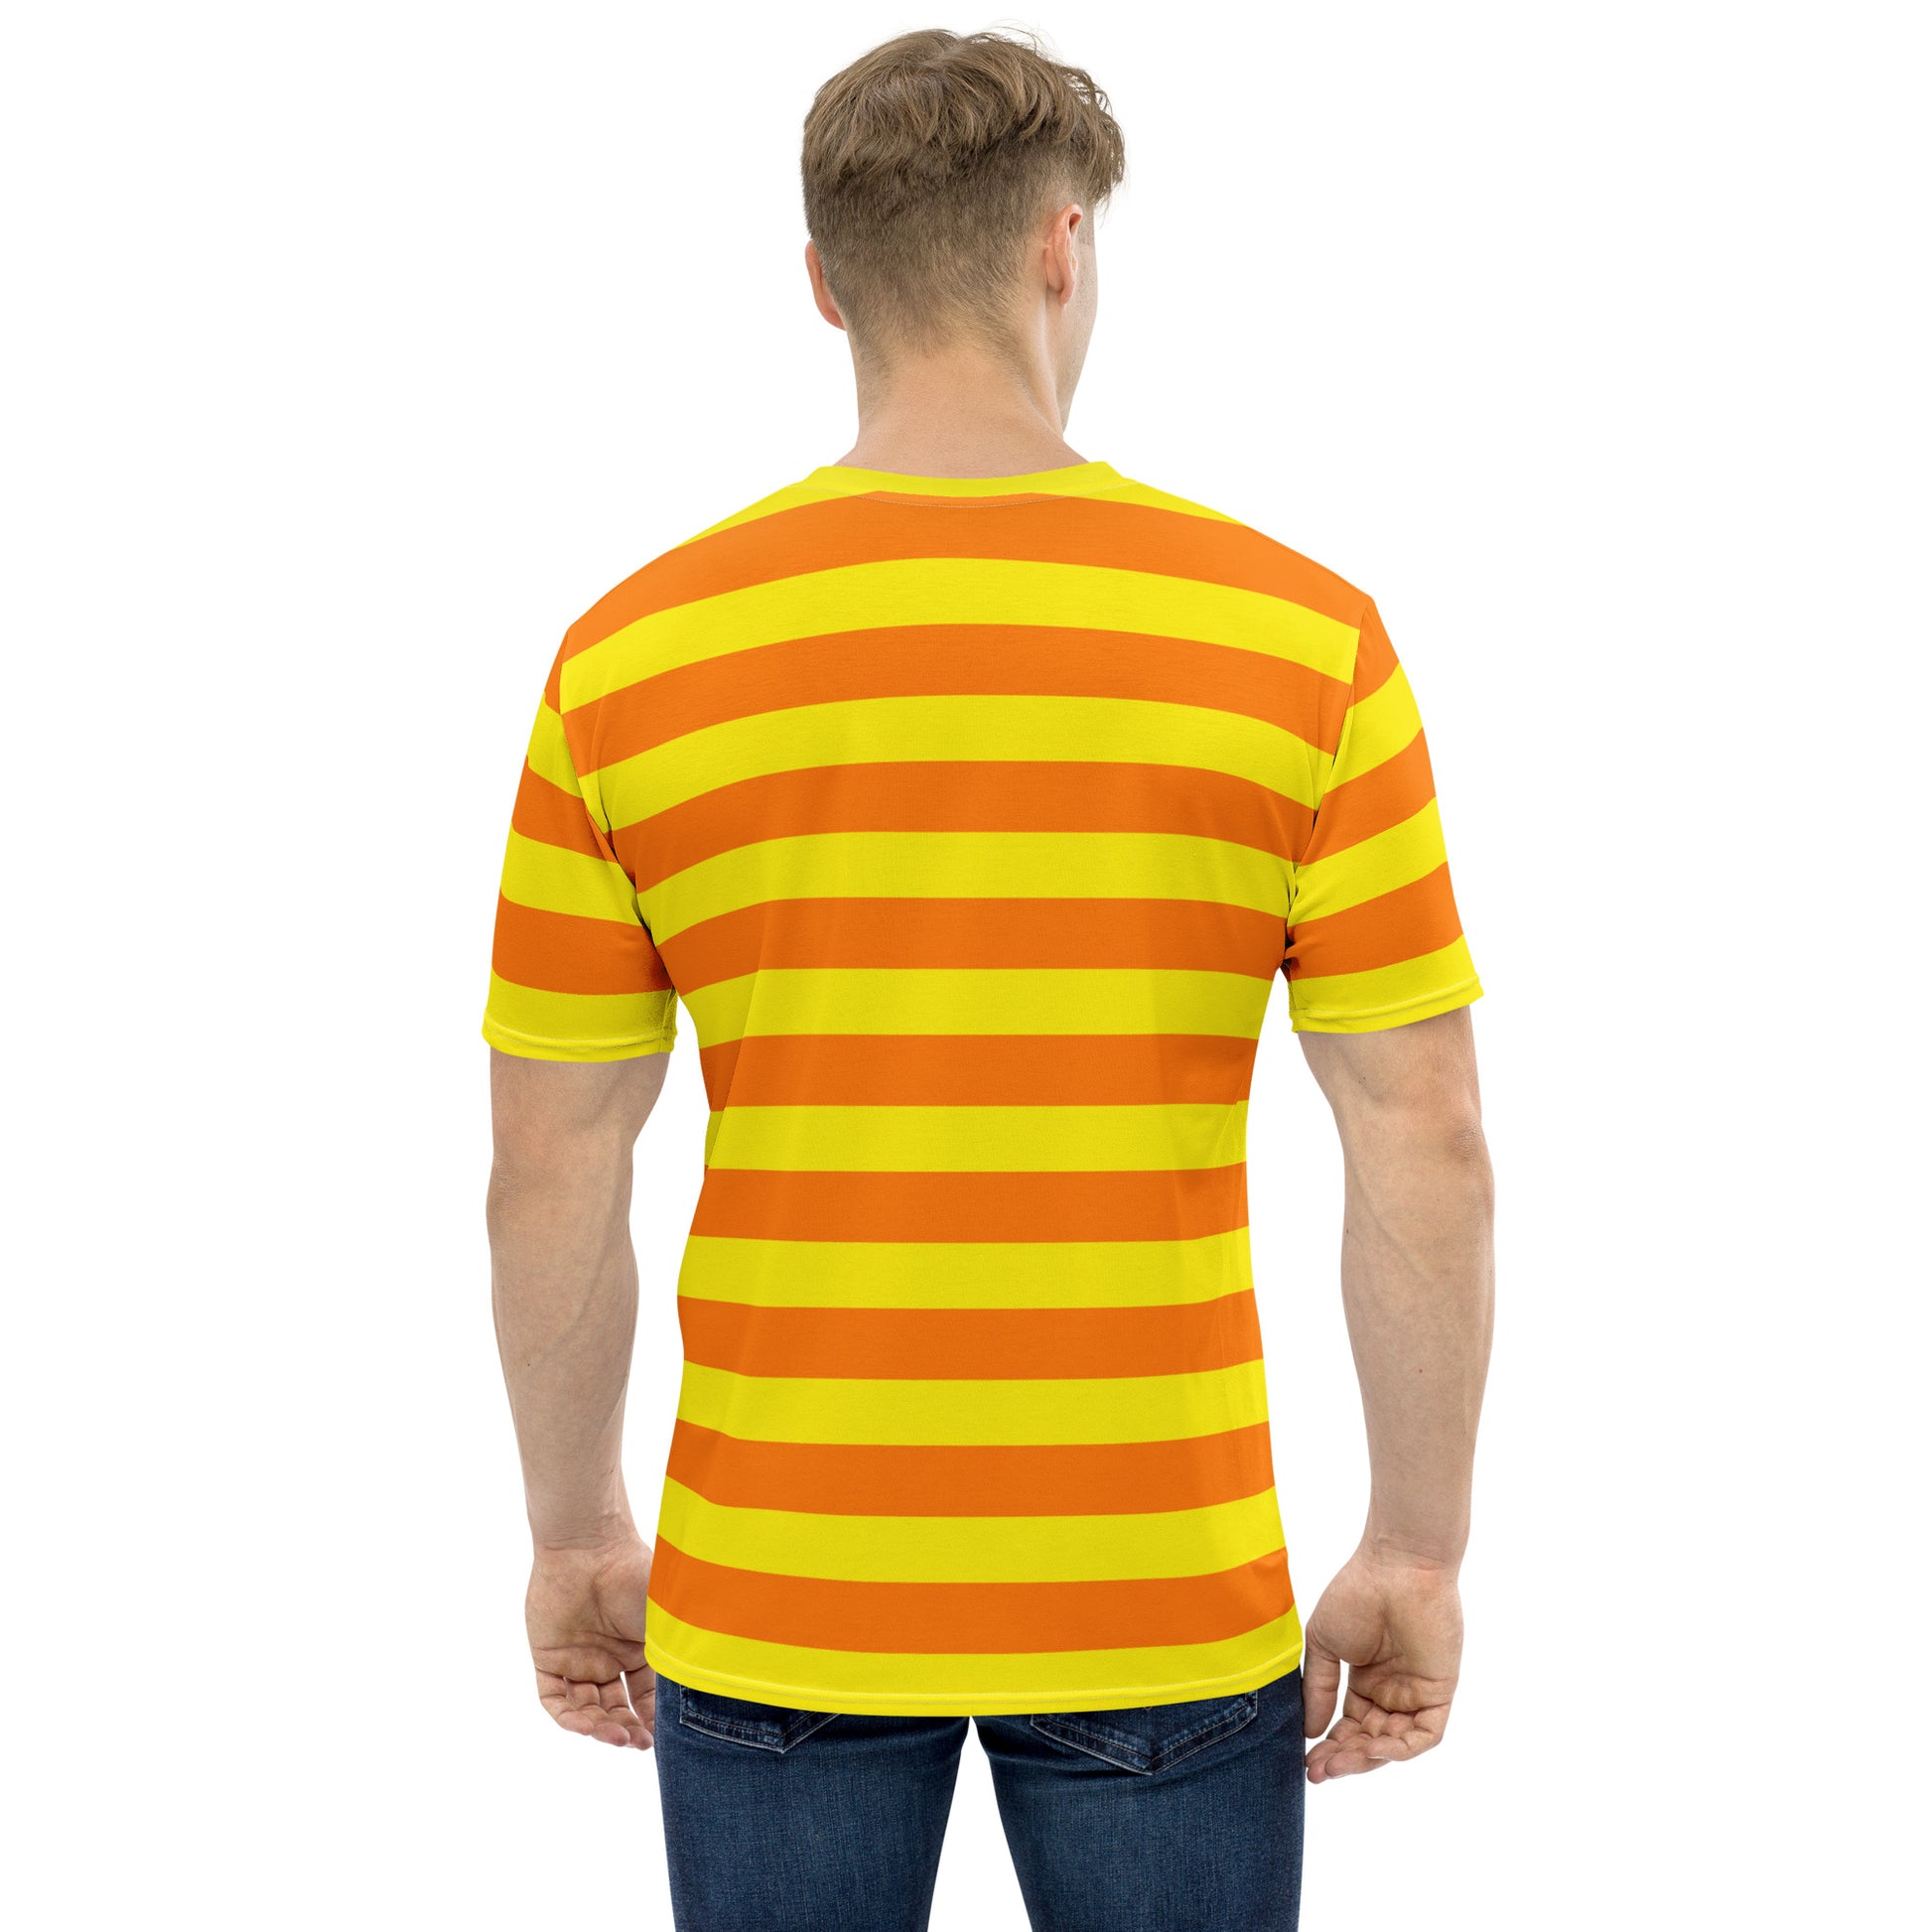 Men's orange and yellow striped t-shirt, back view